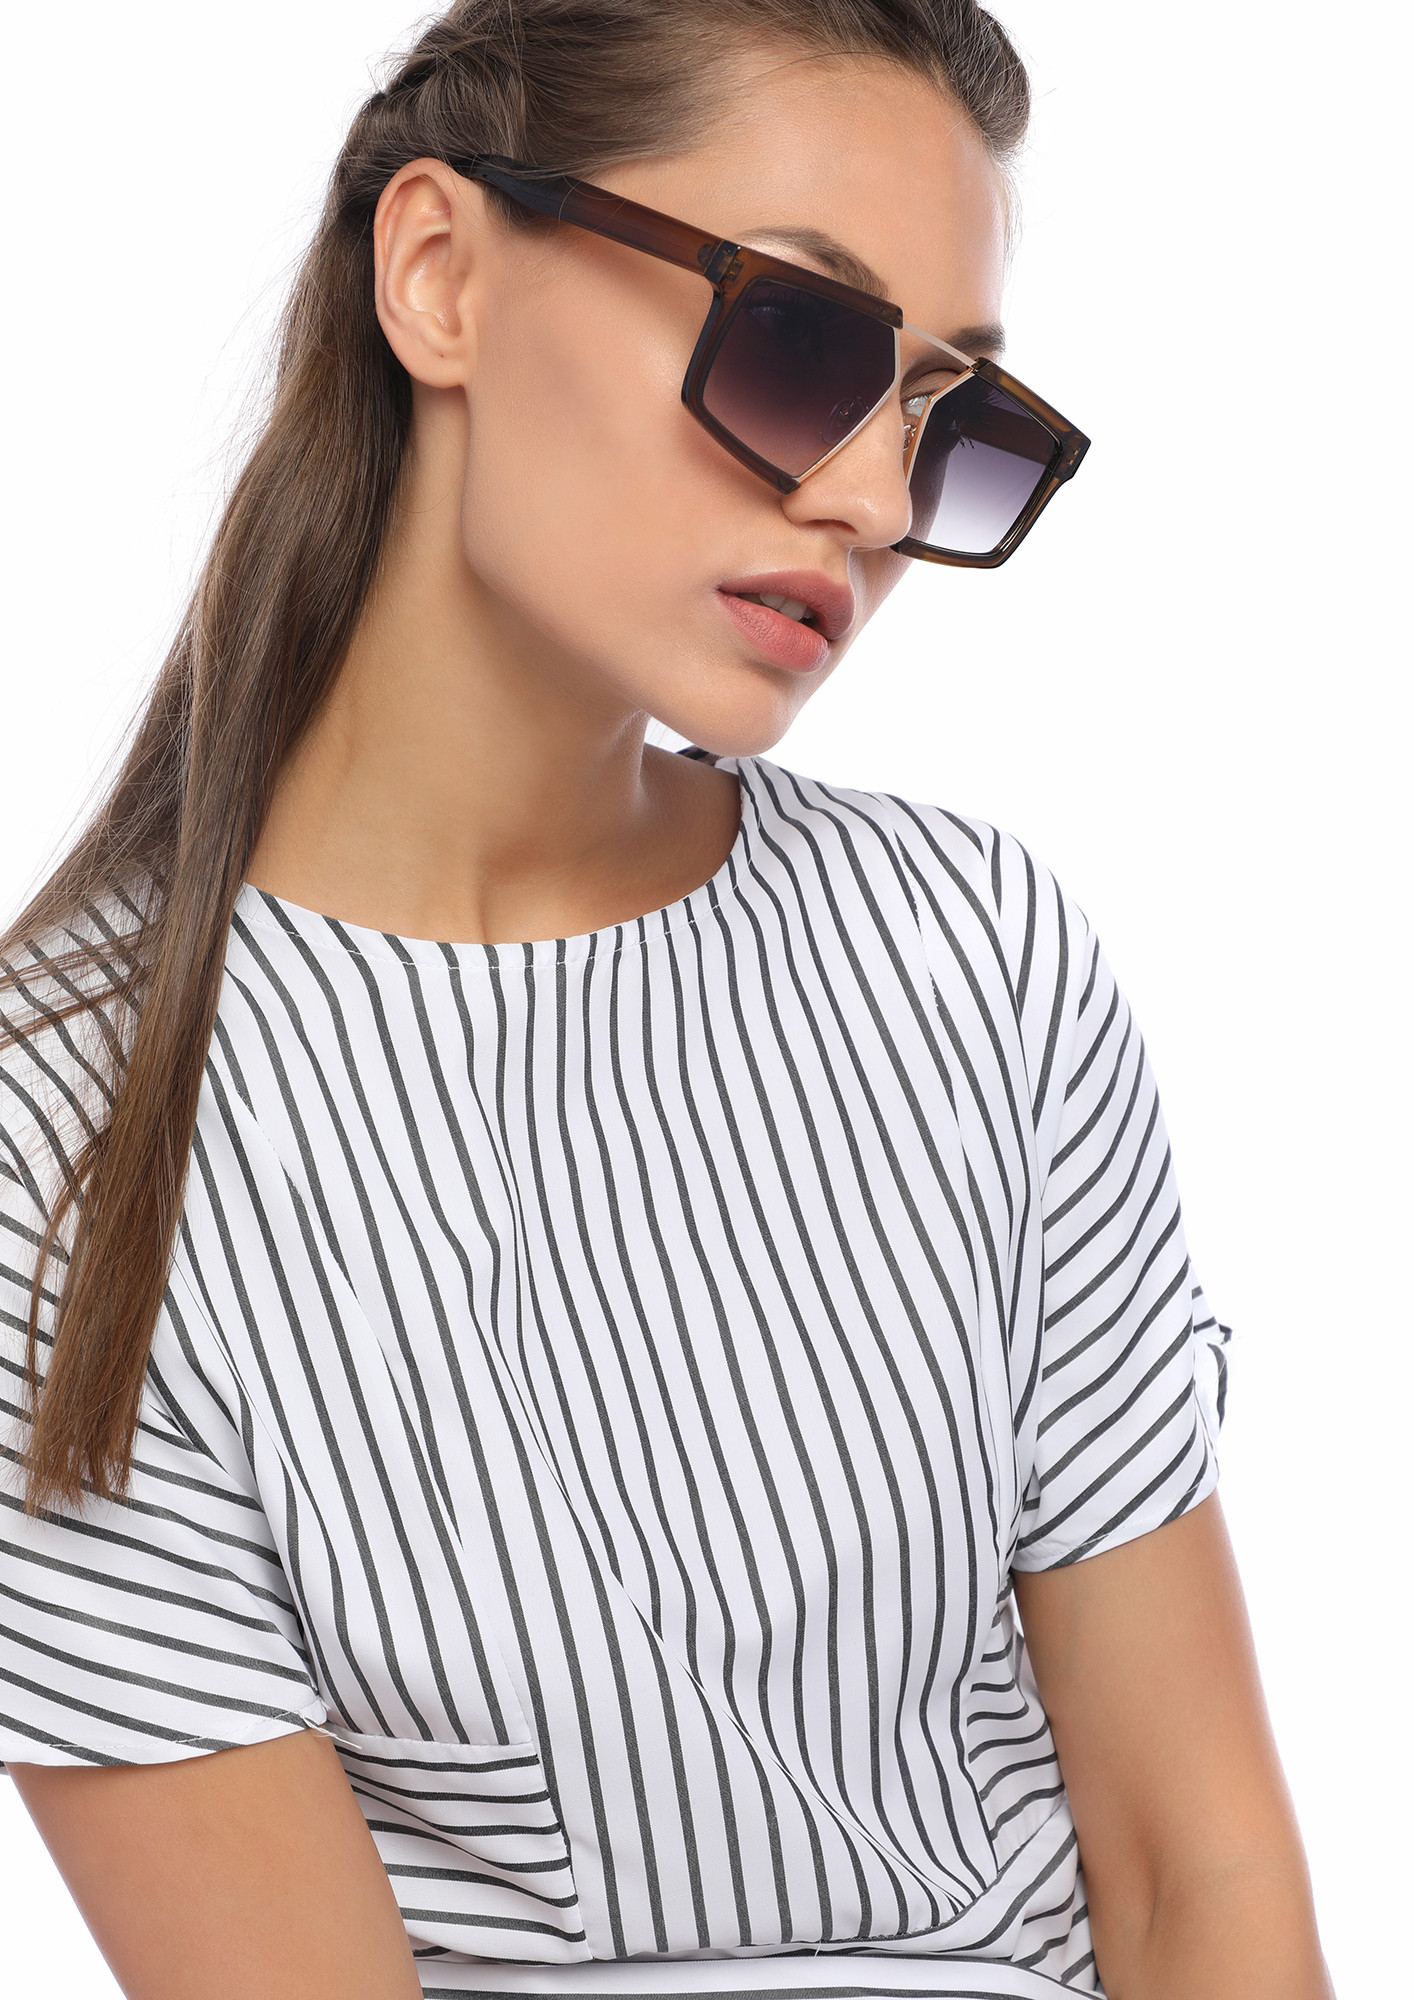 FIND YOUR RIGHT ANGLE GREY ANGULAR SUNGLASSES